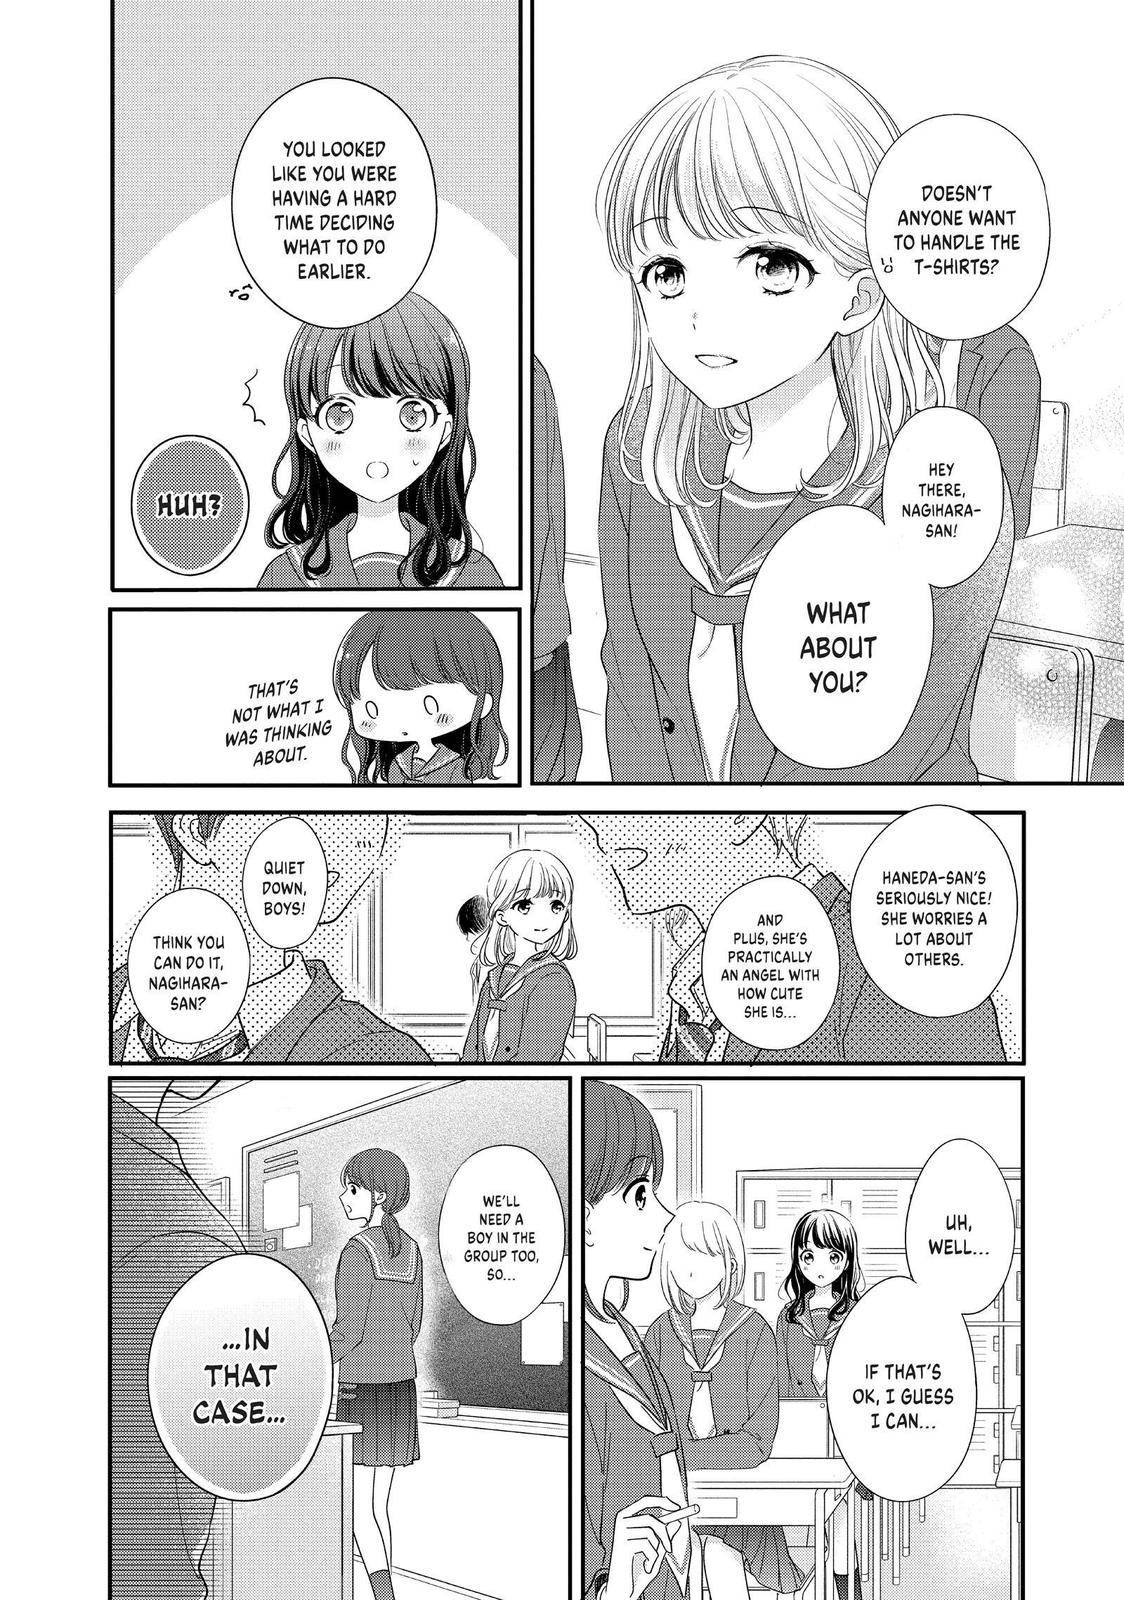 Chihiro-kun Only Has Eyes for Me - chapter 26 - #6